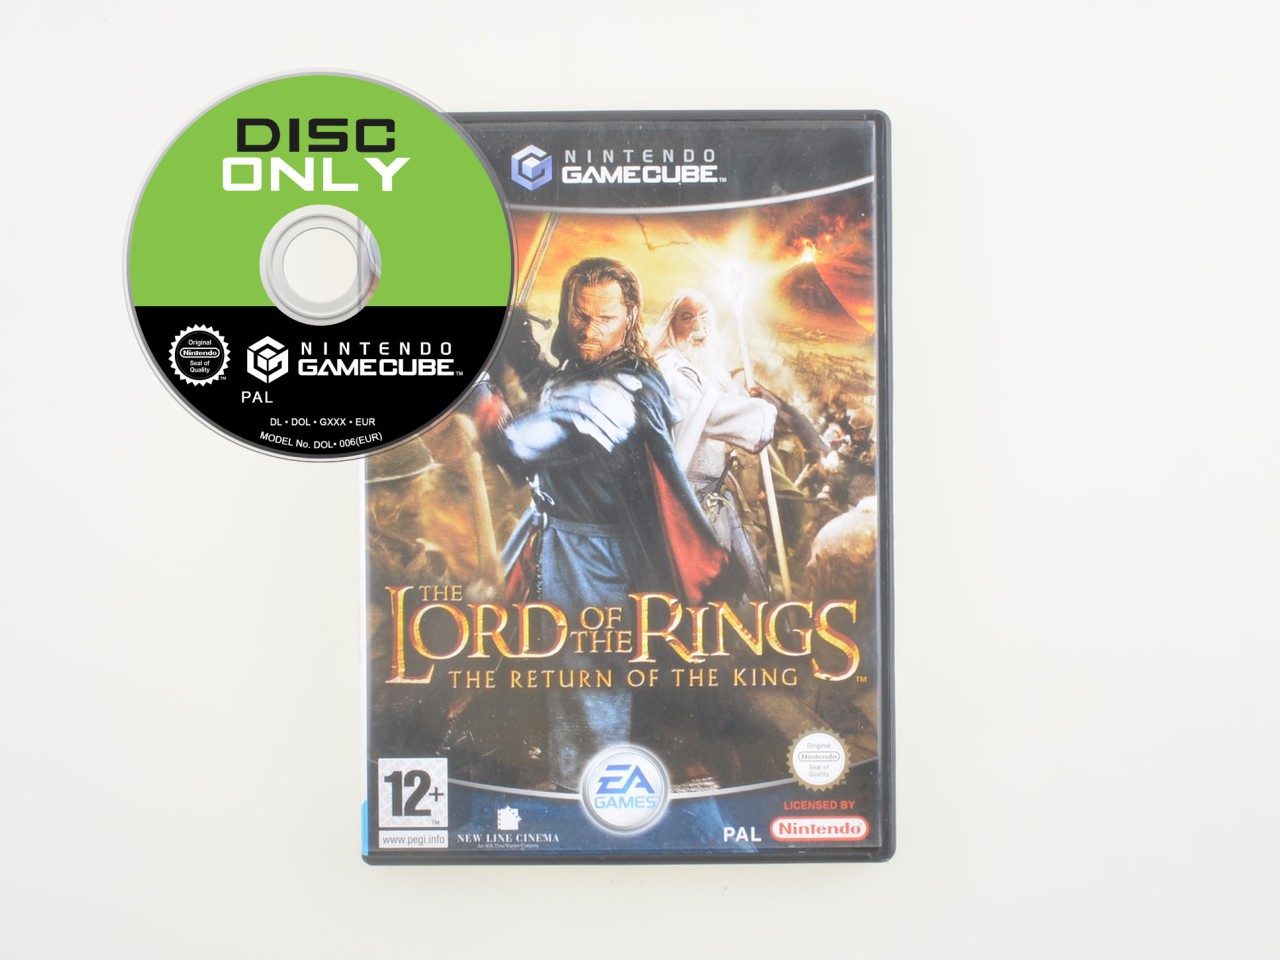 The Lord of the Rings: The Return of the King - Disc Only Kopen | Gamecube Games